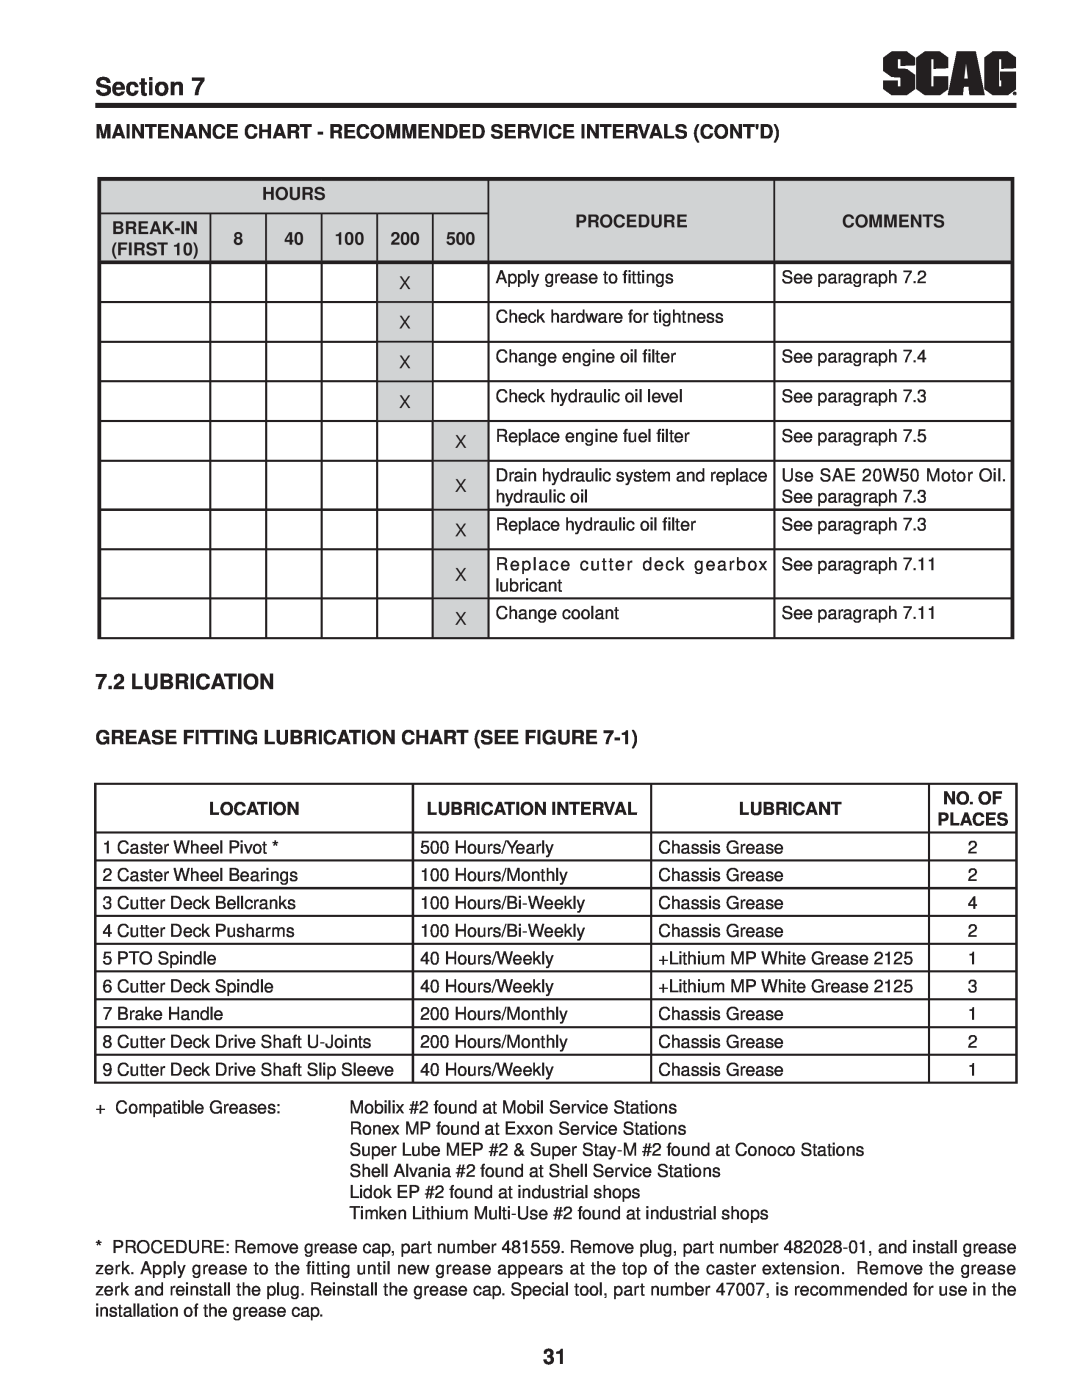 Scag Power Equipment STT61V-31EFI-SS manual Section, Grease Fitting Lubrication Chart See Figure 